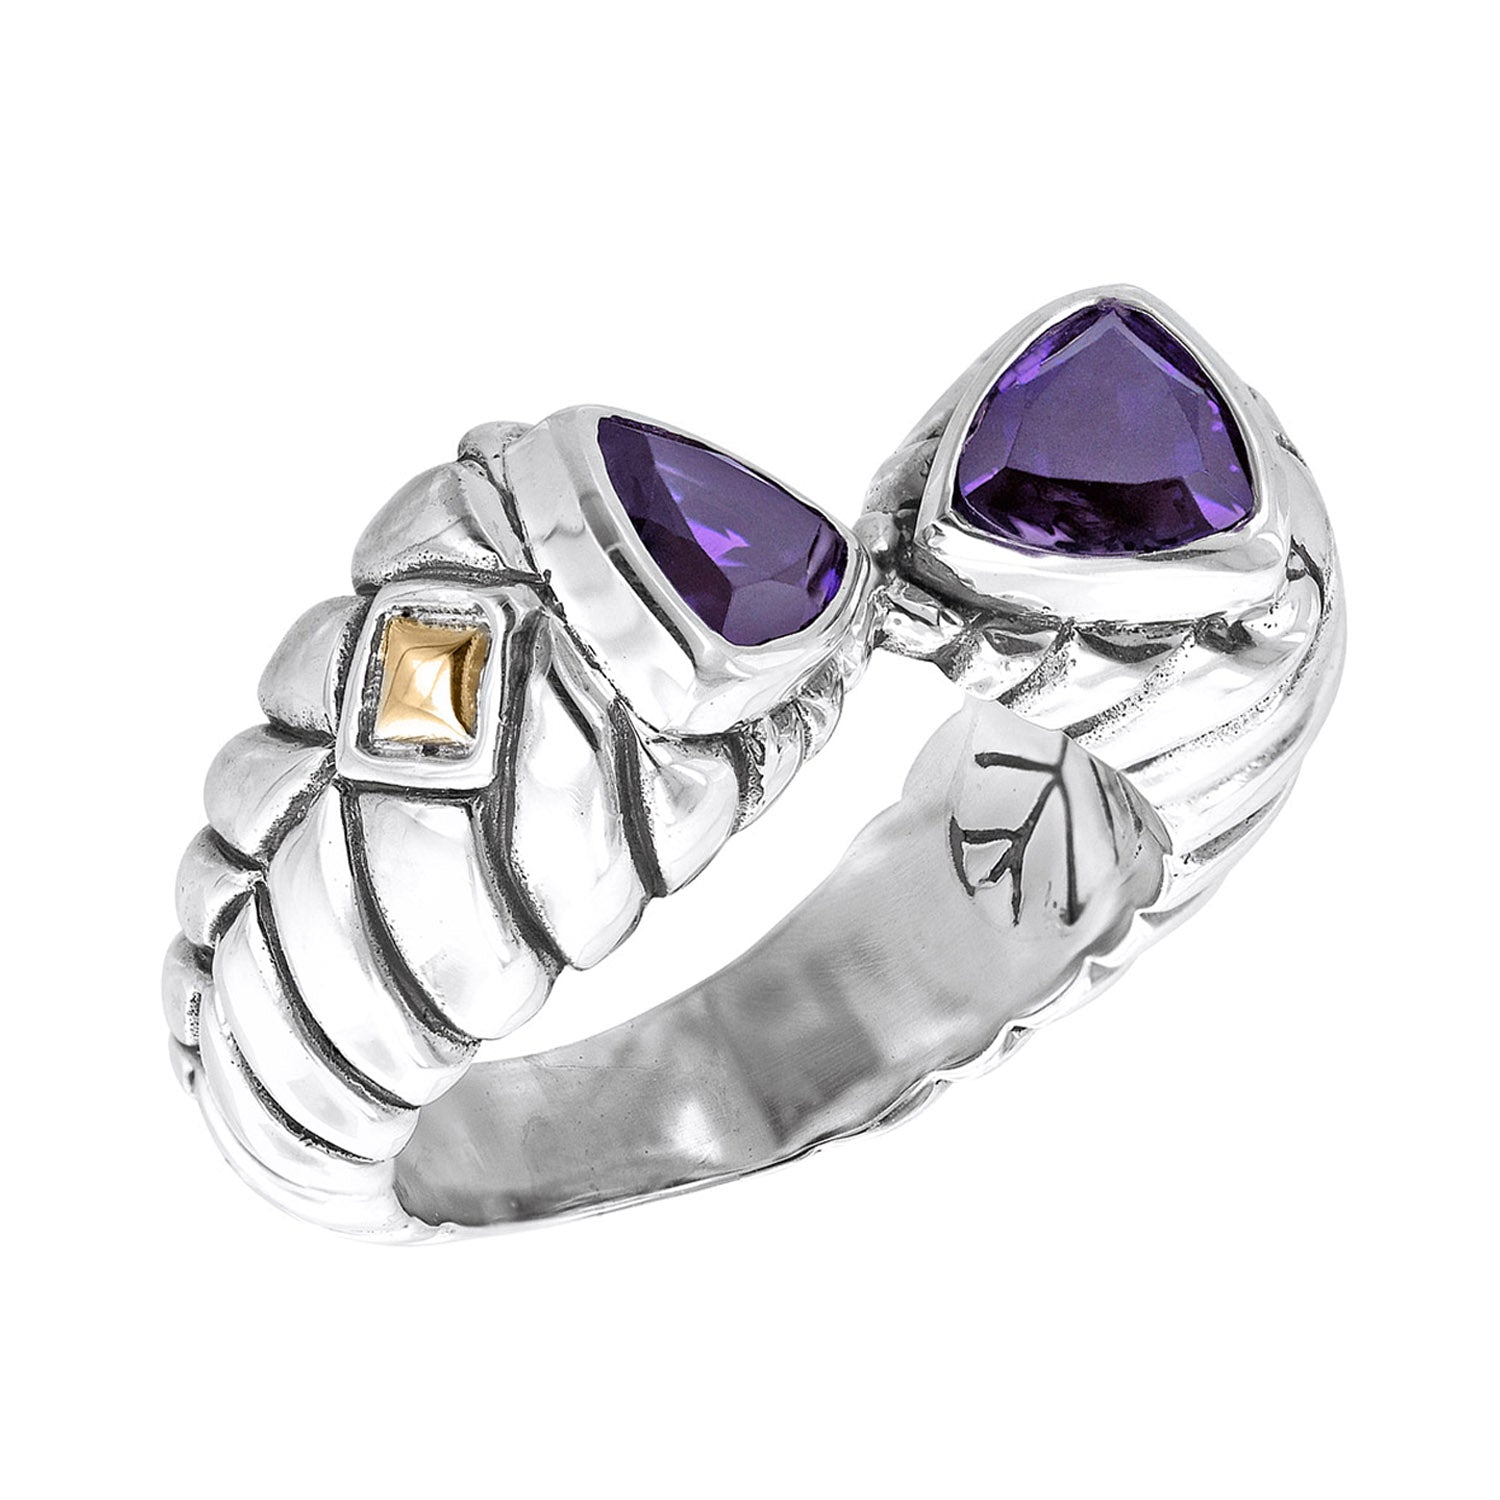 Sterling silver herringbone cable ring with triangular purple stone and 18k gold diamond shapes